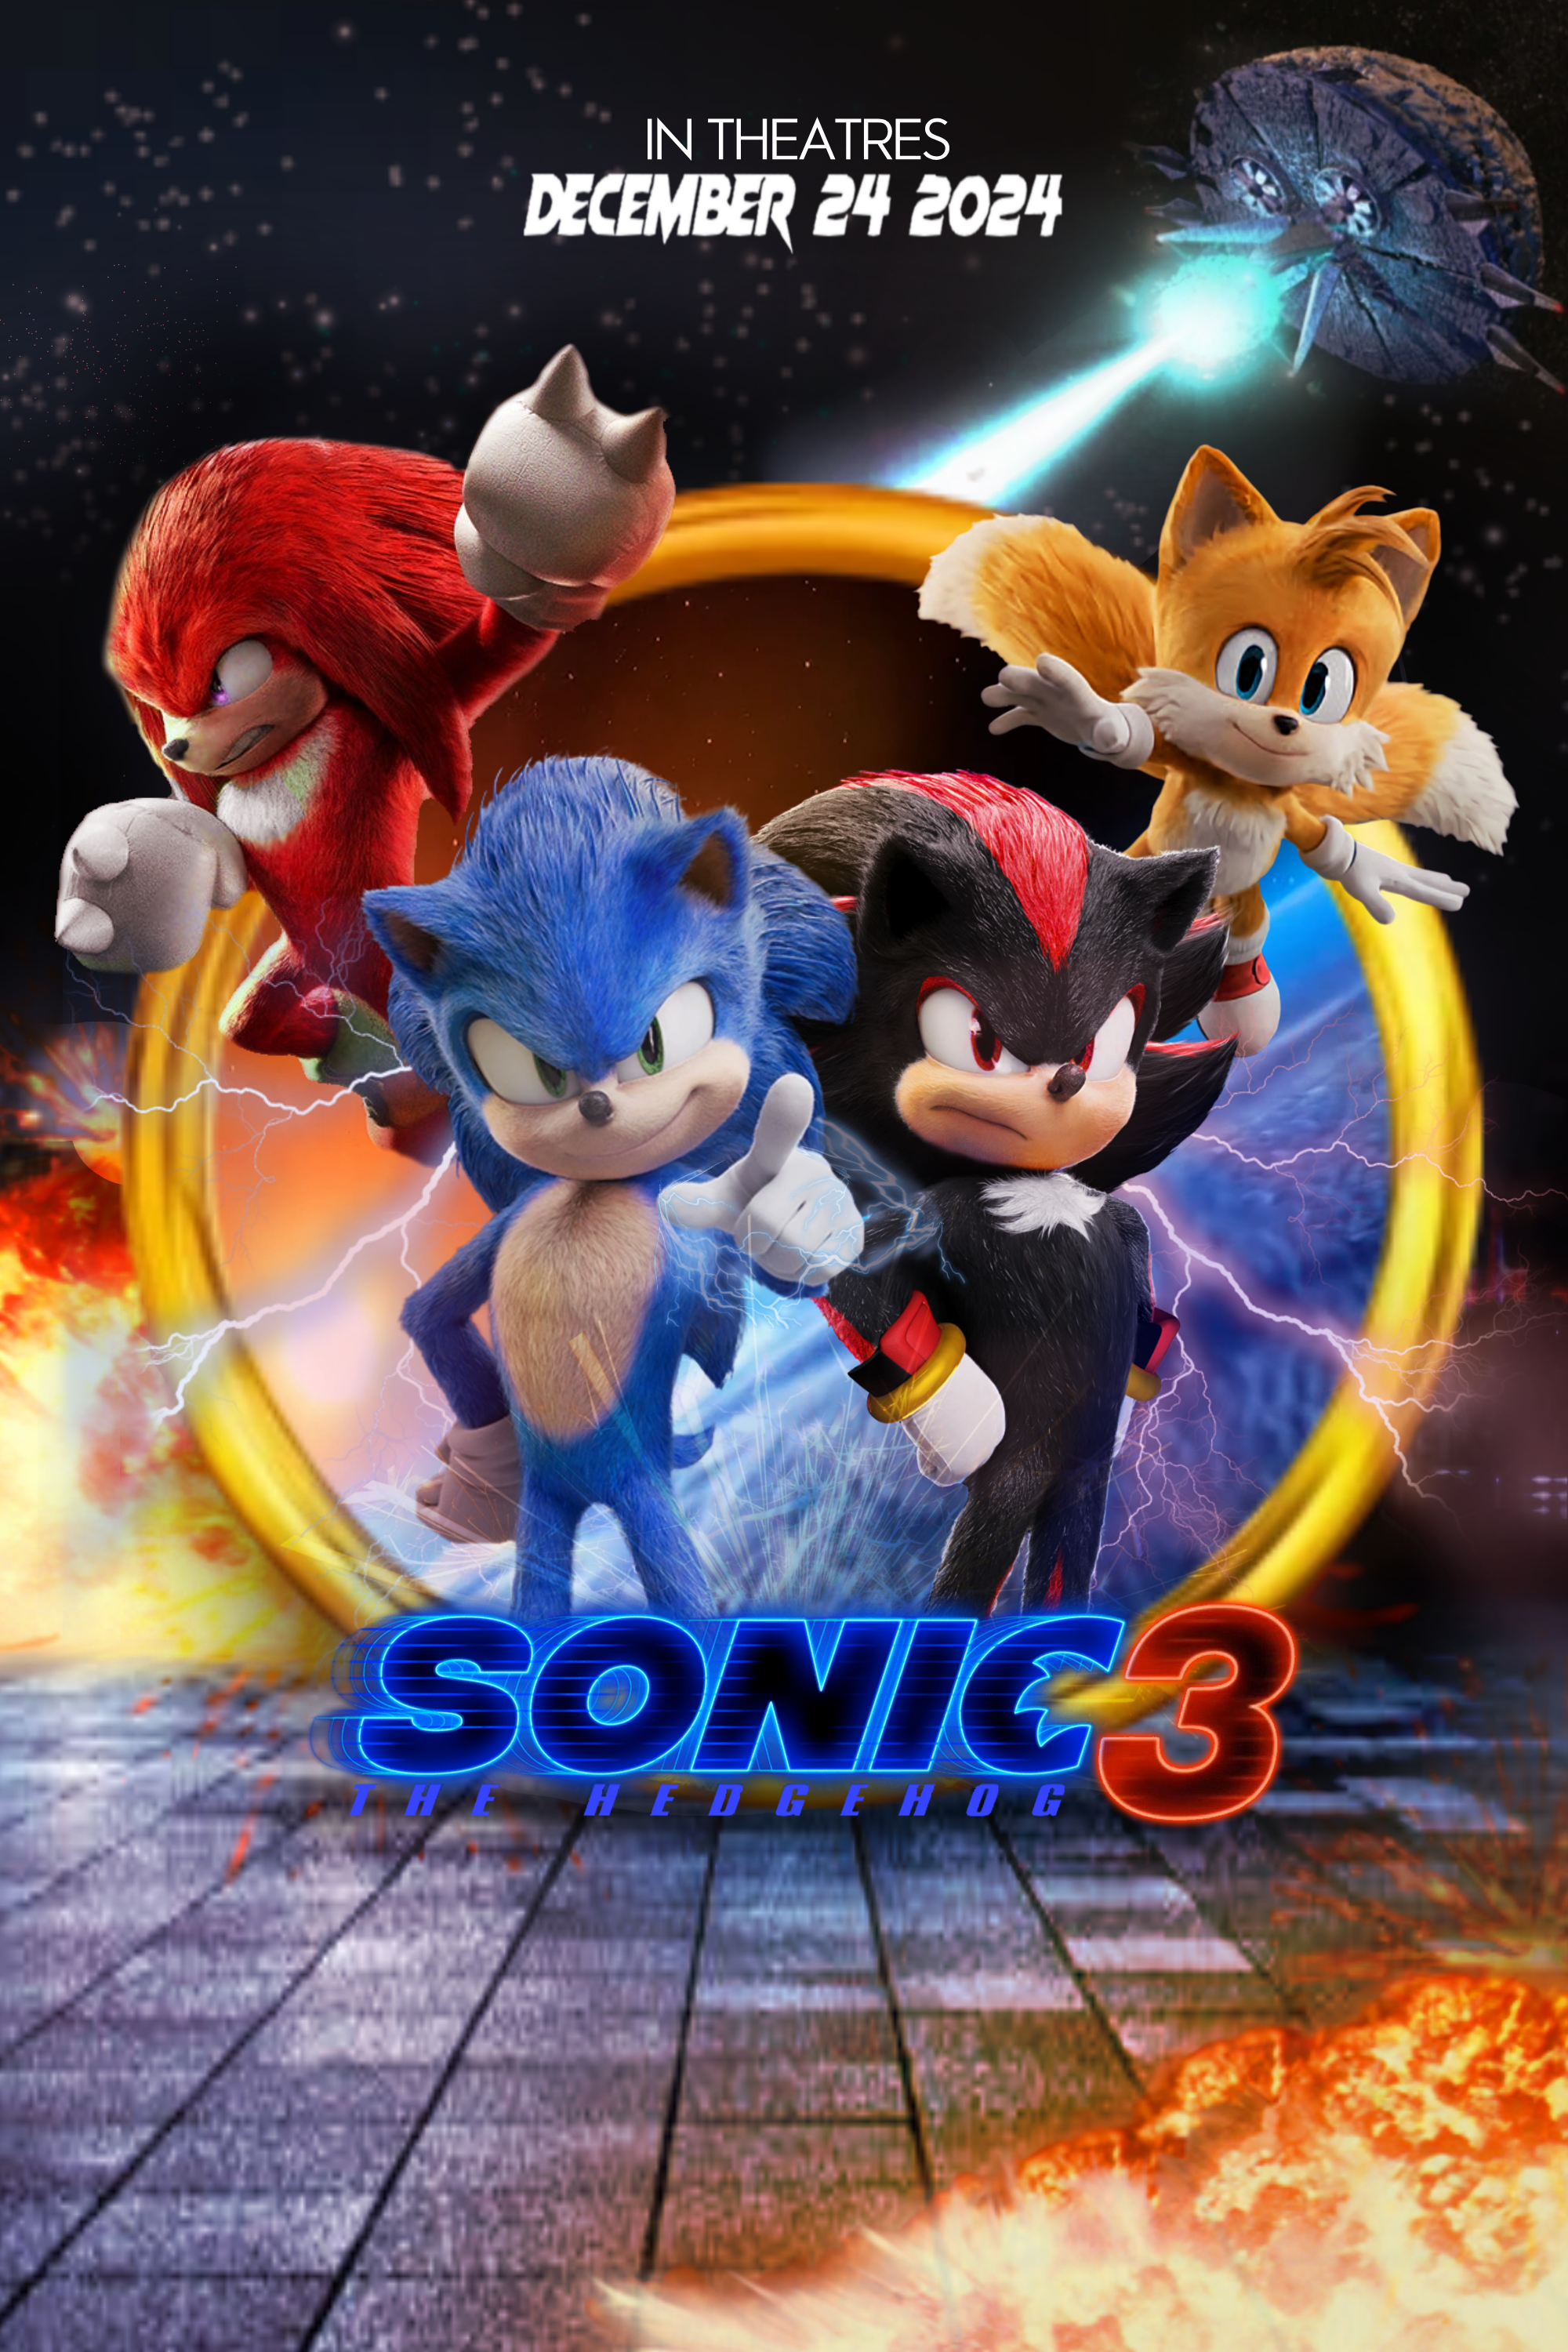 SONIC 3 HYPE — sonic movie 3 what ifs making me think things in